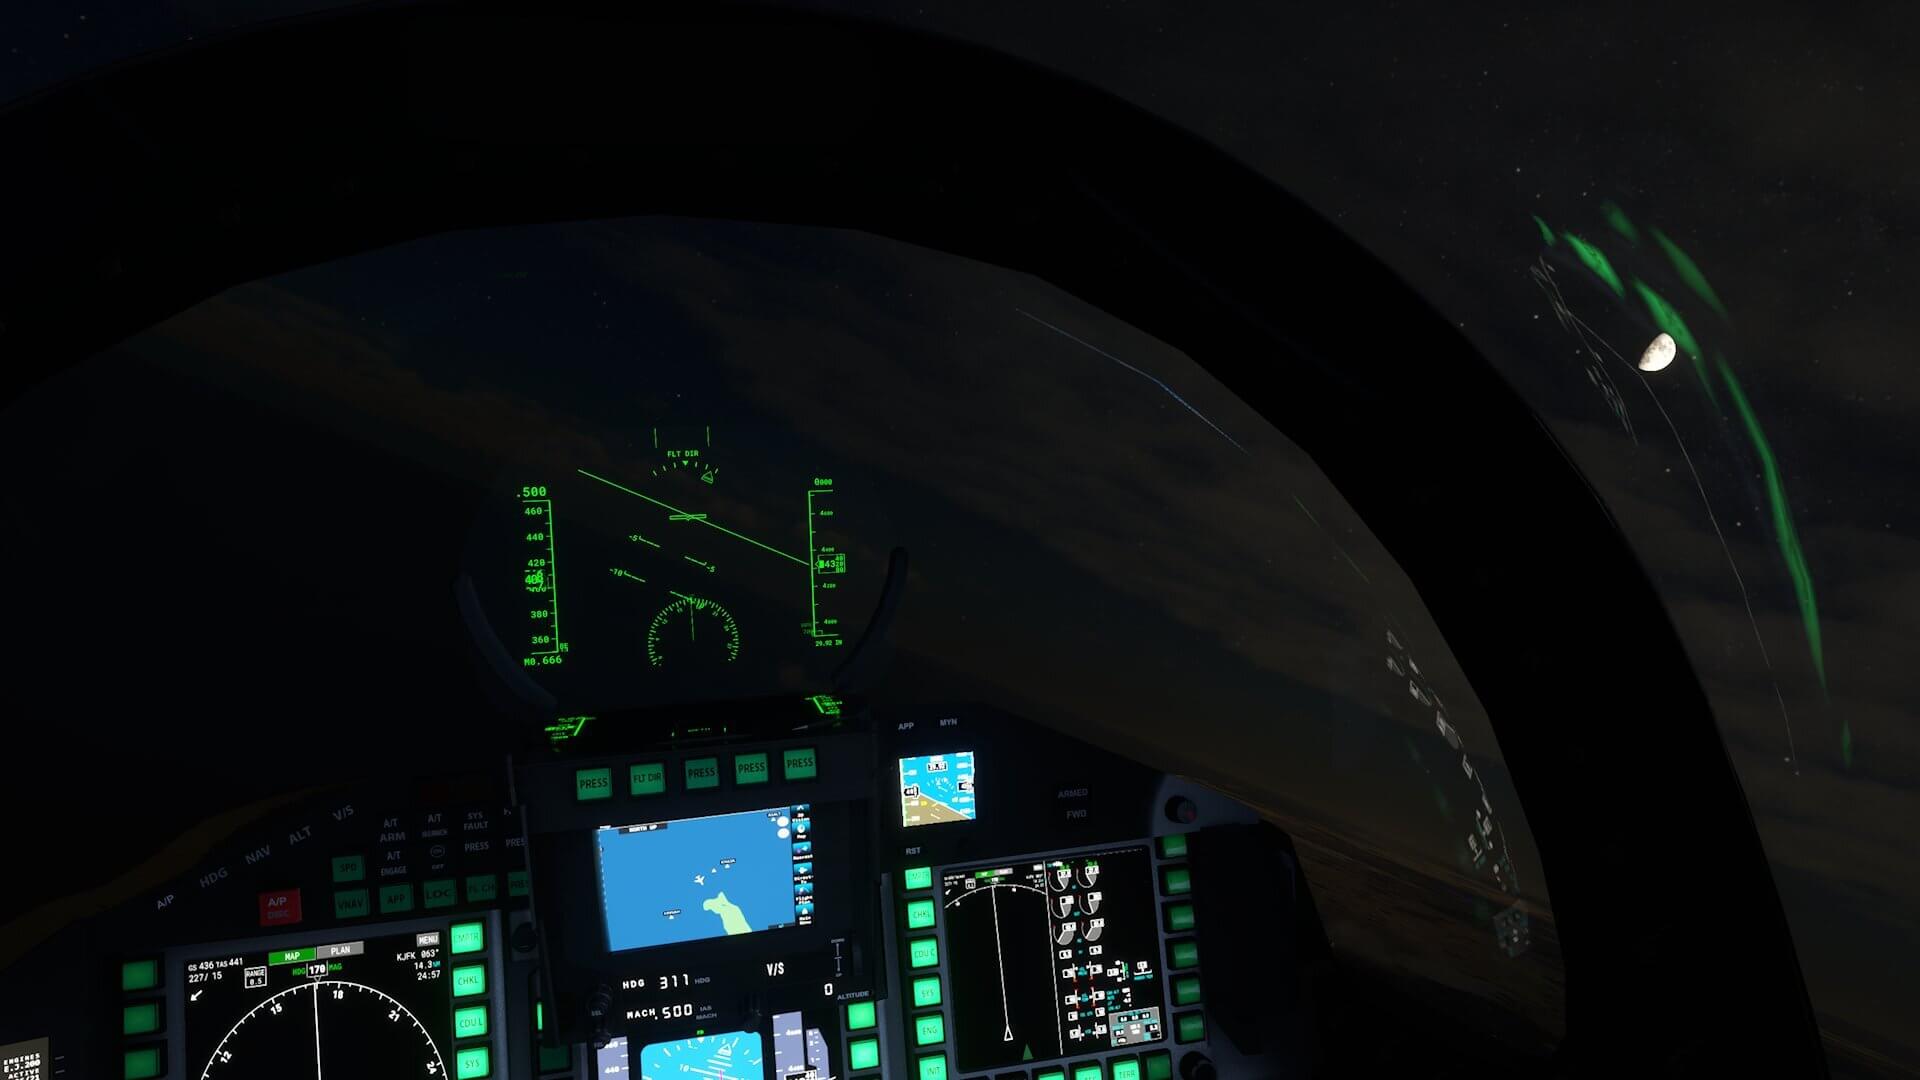 Inside a cockpit during night time